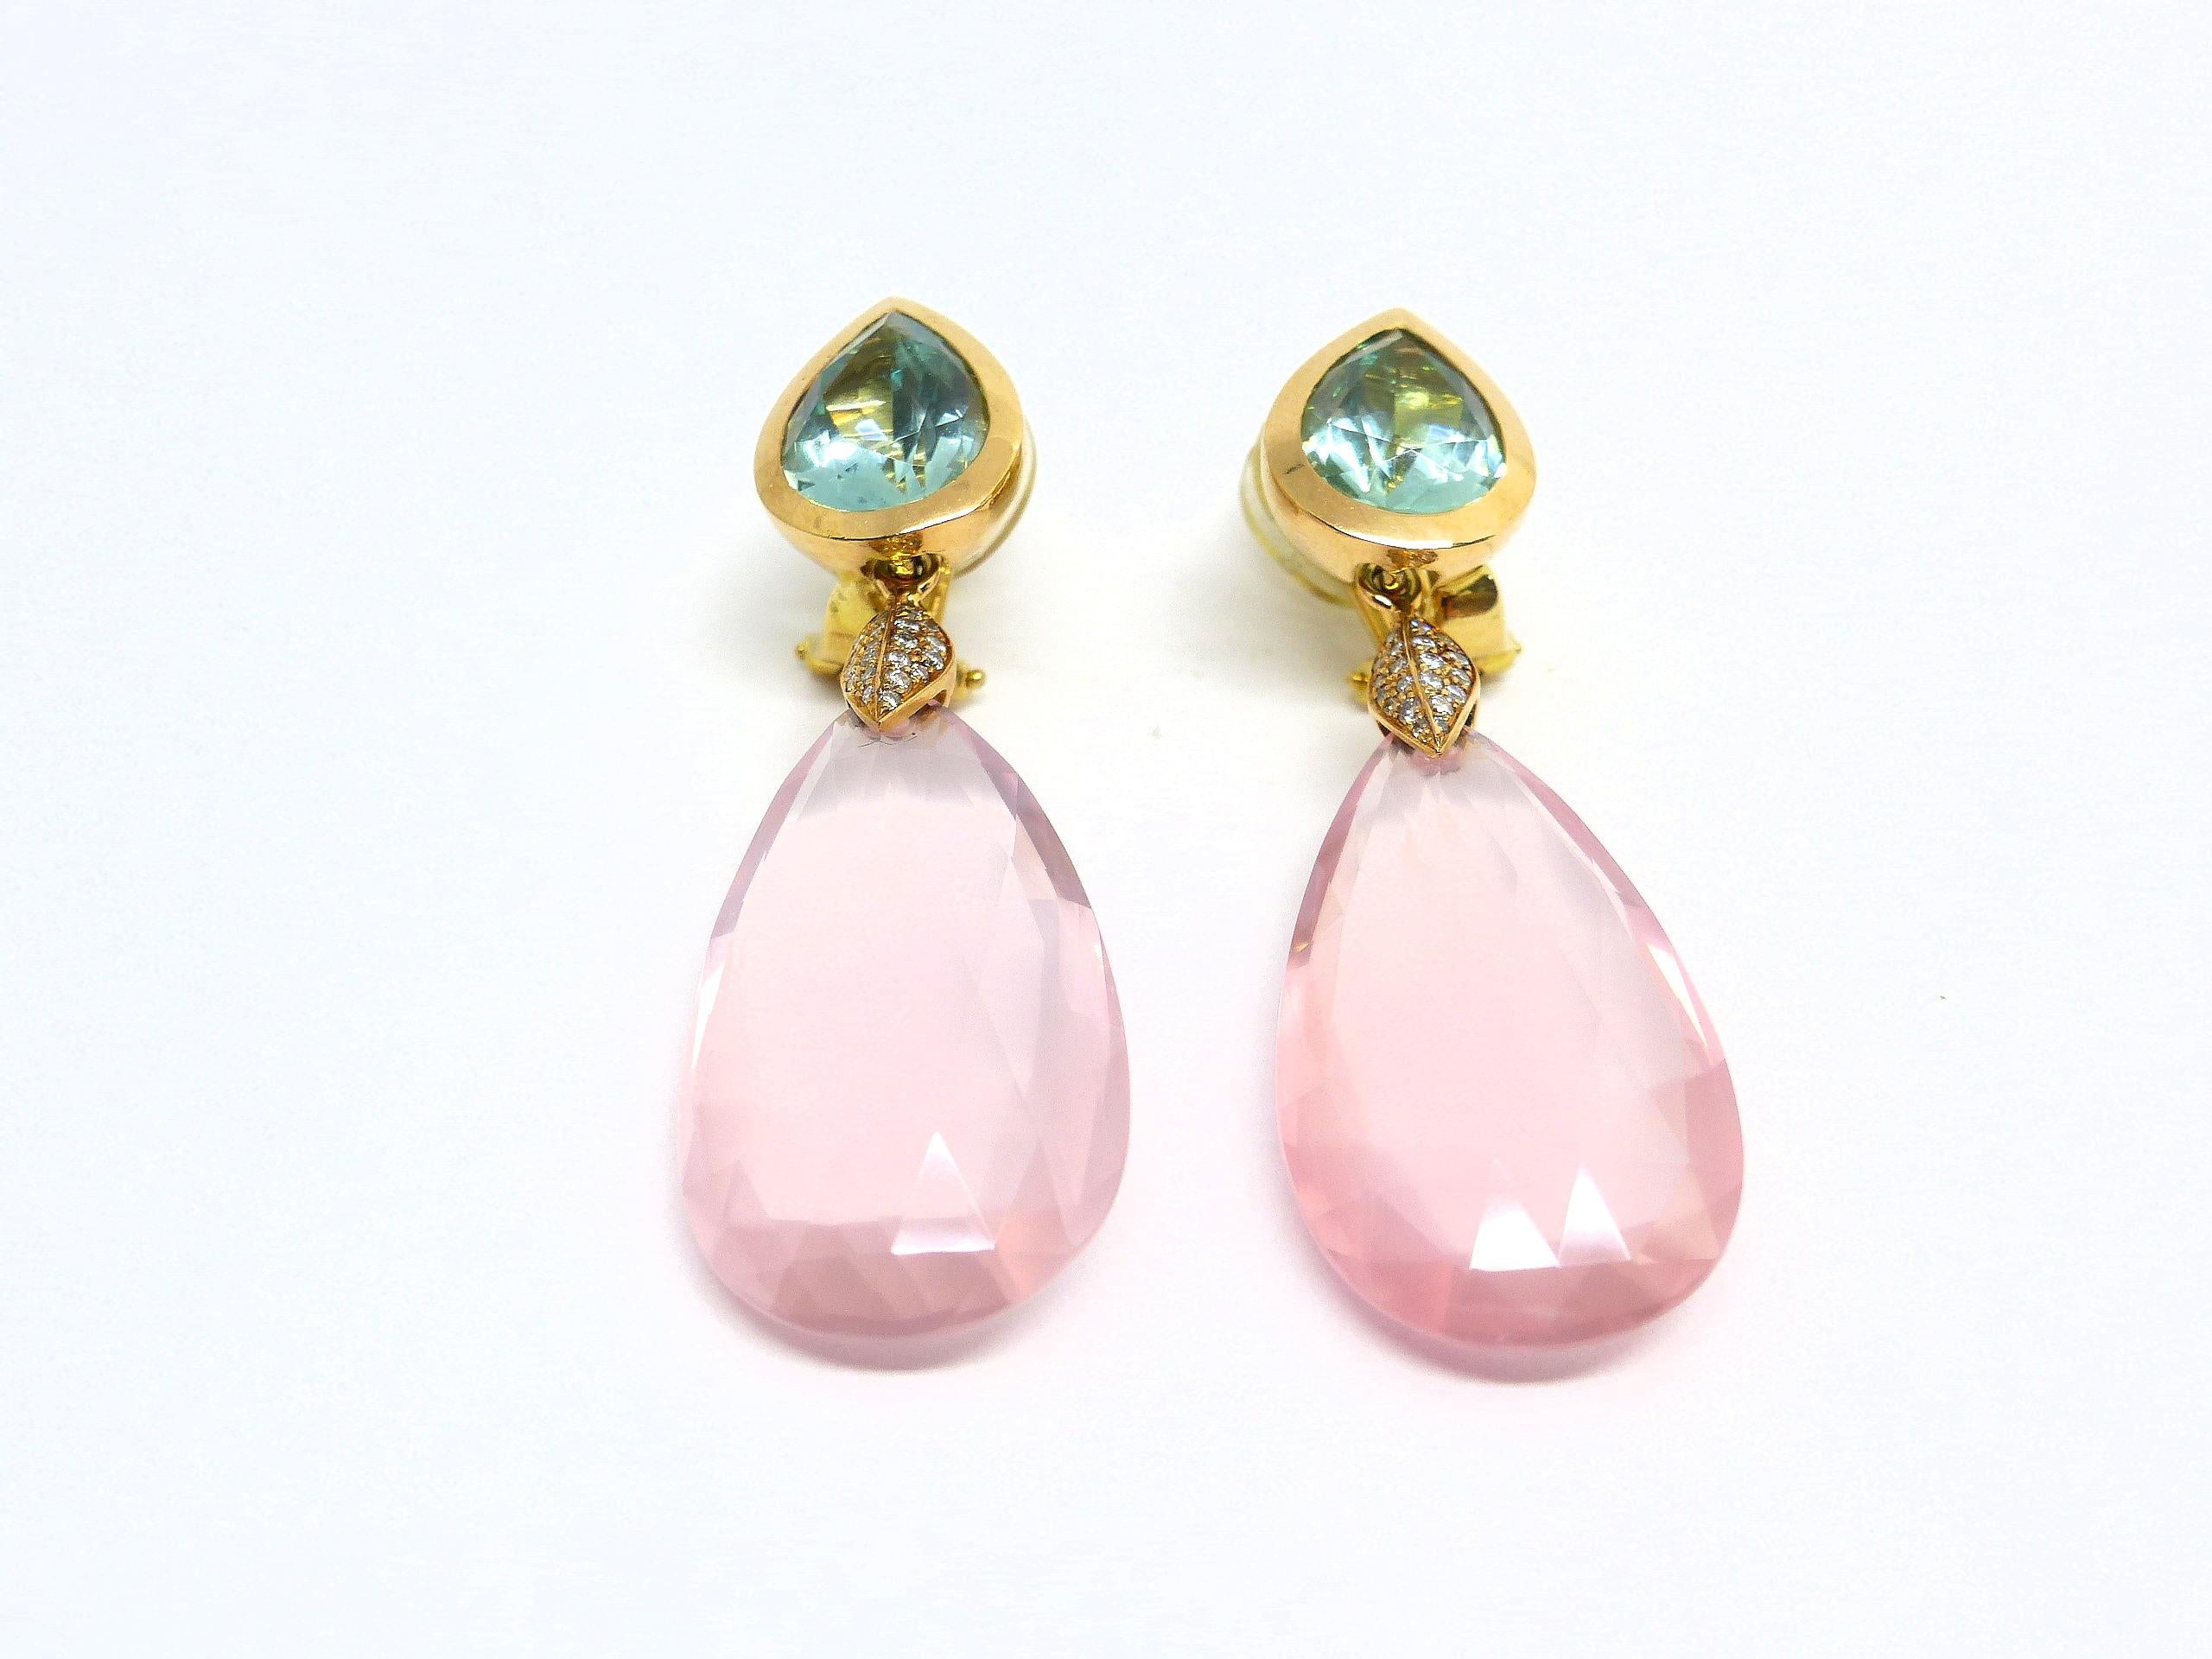 Thomas Leyser is renowned for his contemporary jewellery designs utilizing fine gemstones.

This 18k rose gold earring is set with 2x fine Berylls in magnificent blueish/greenish colour (pear-shape, 12x9 mm, 6.15ct) + 2x fine Rosequarzes